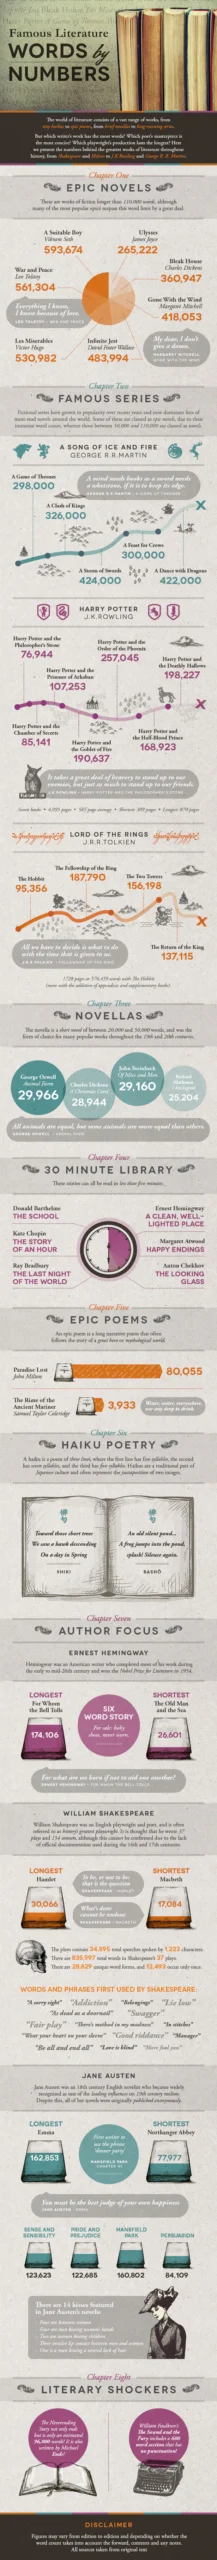 Famous Literature Words By Numbers [InfoGraphic]
